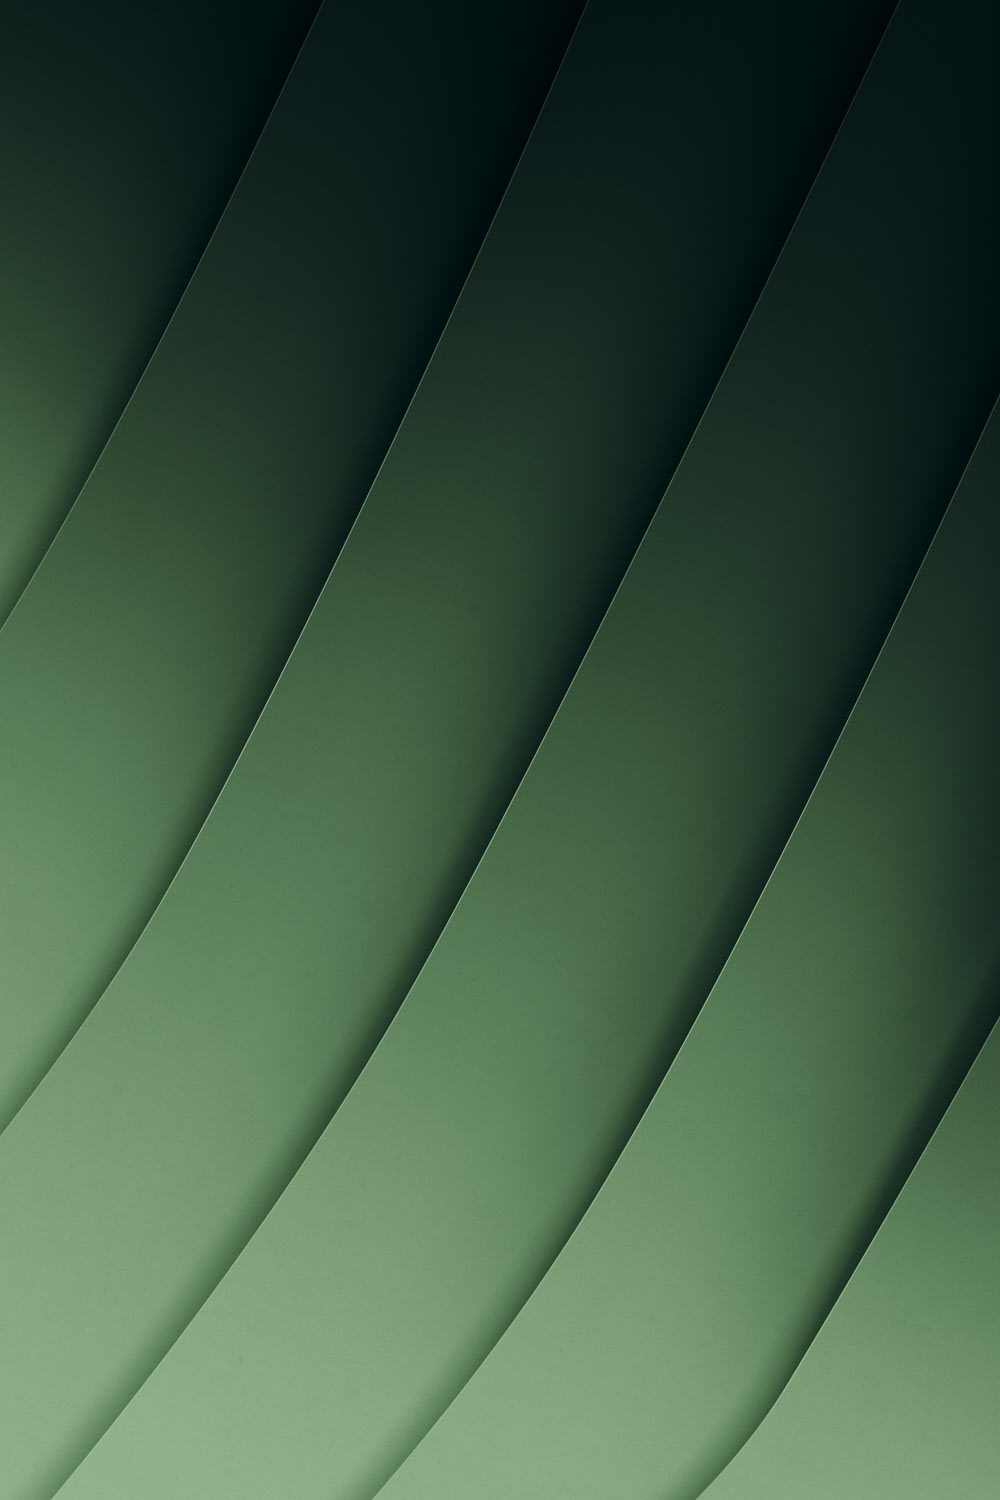 a close up of a cell phone with a green background